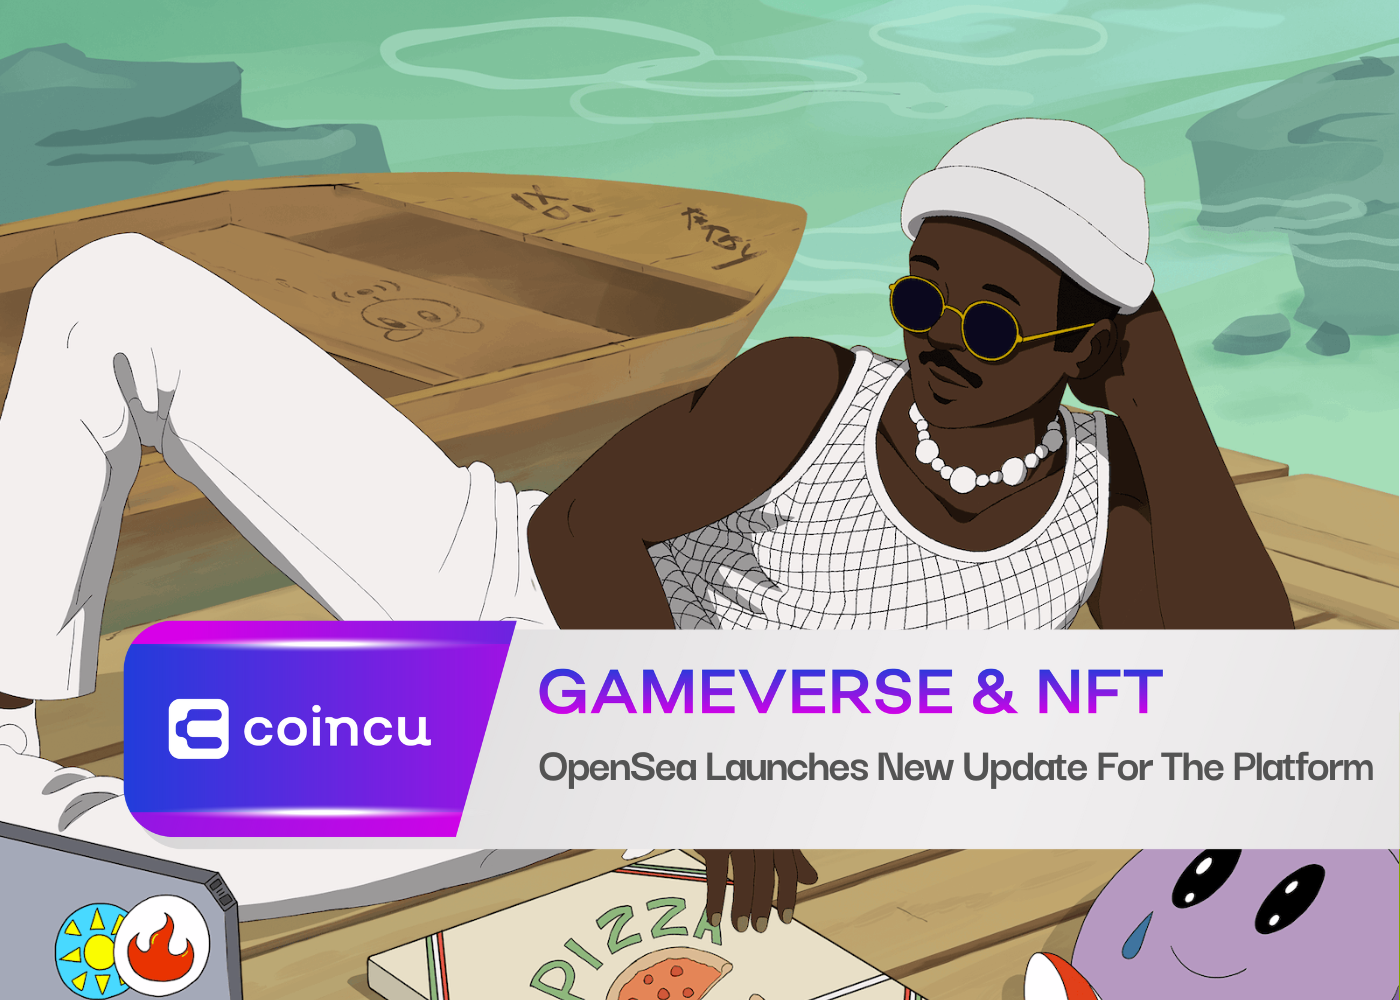 OpenSea Launches New Update For The Platform